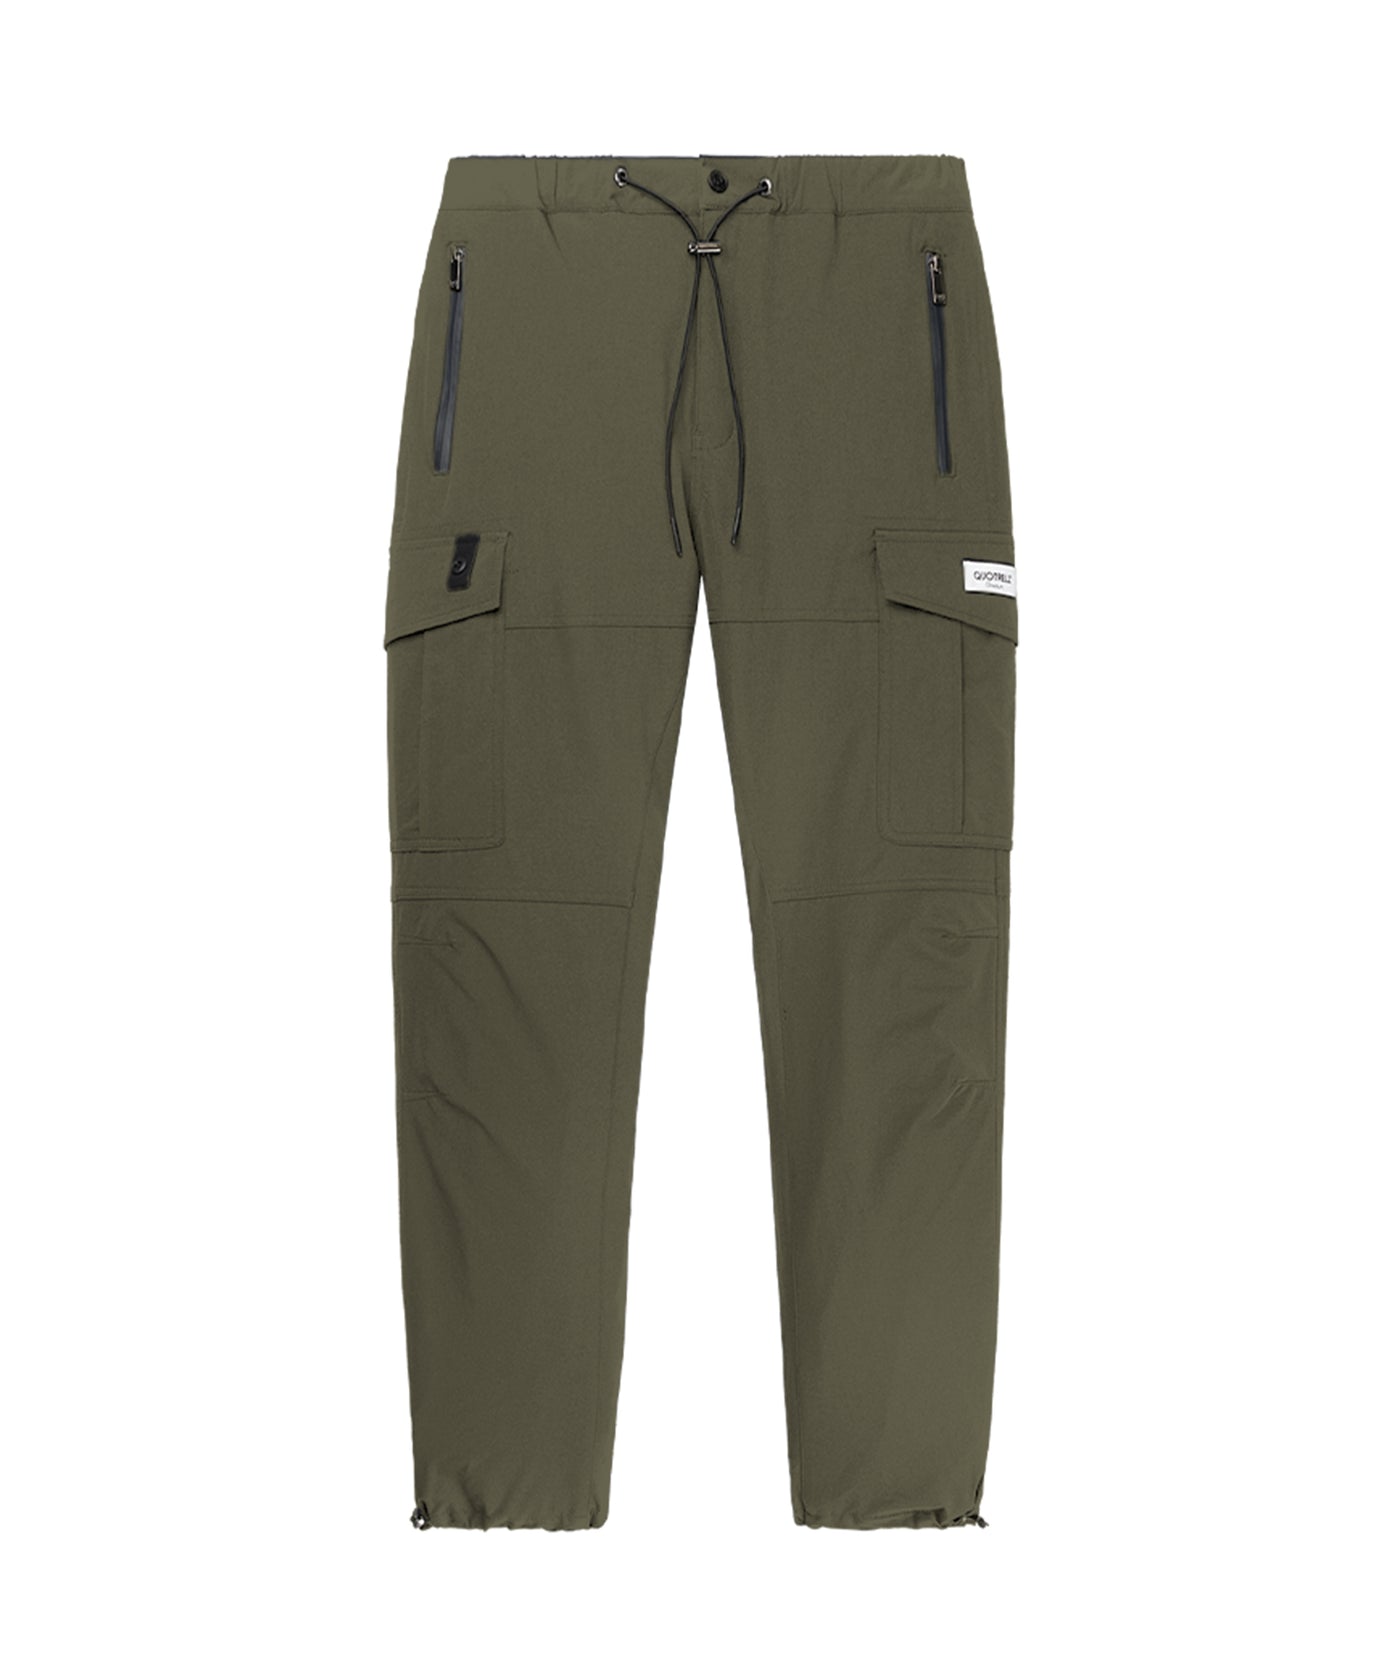 Quotrell - Seattle - Cargo Pants - Army Green